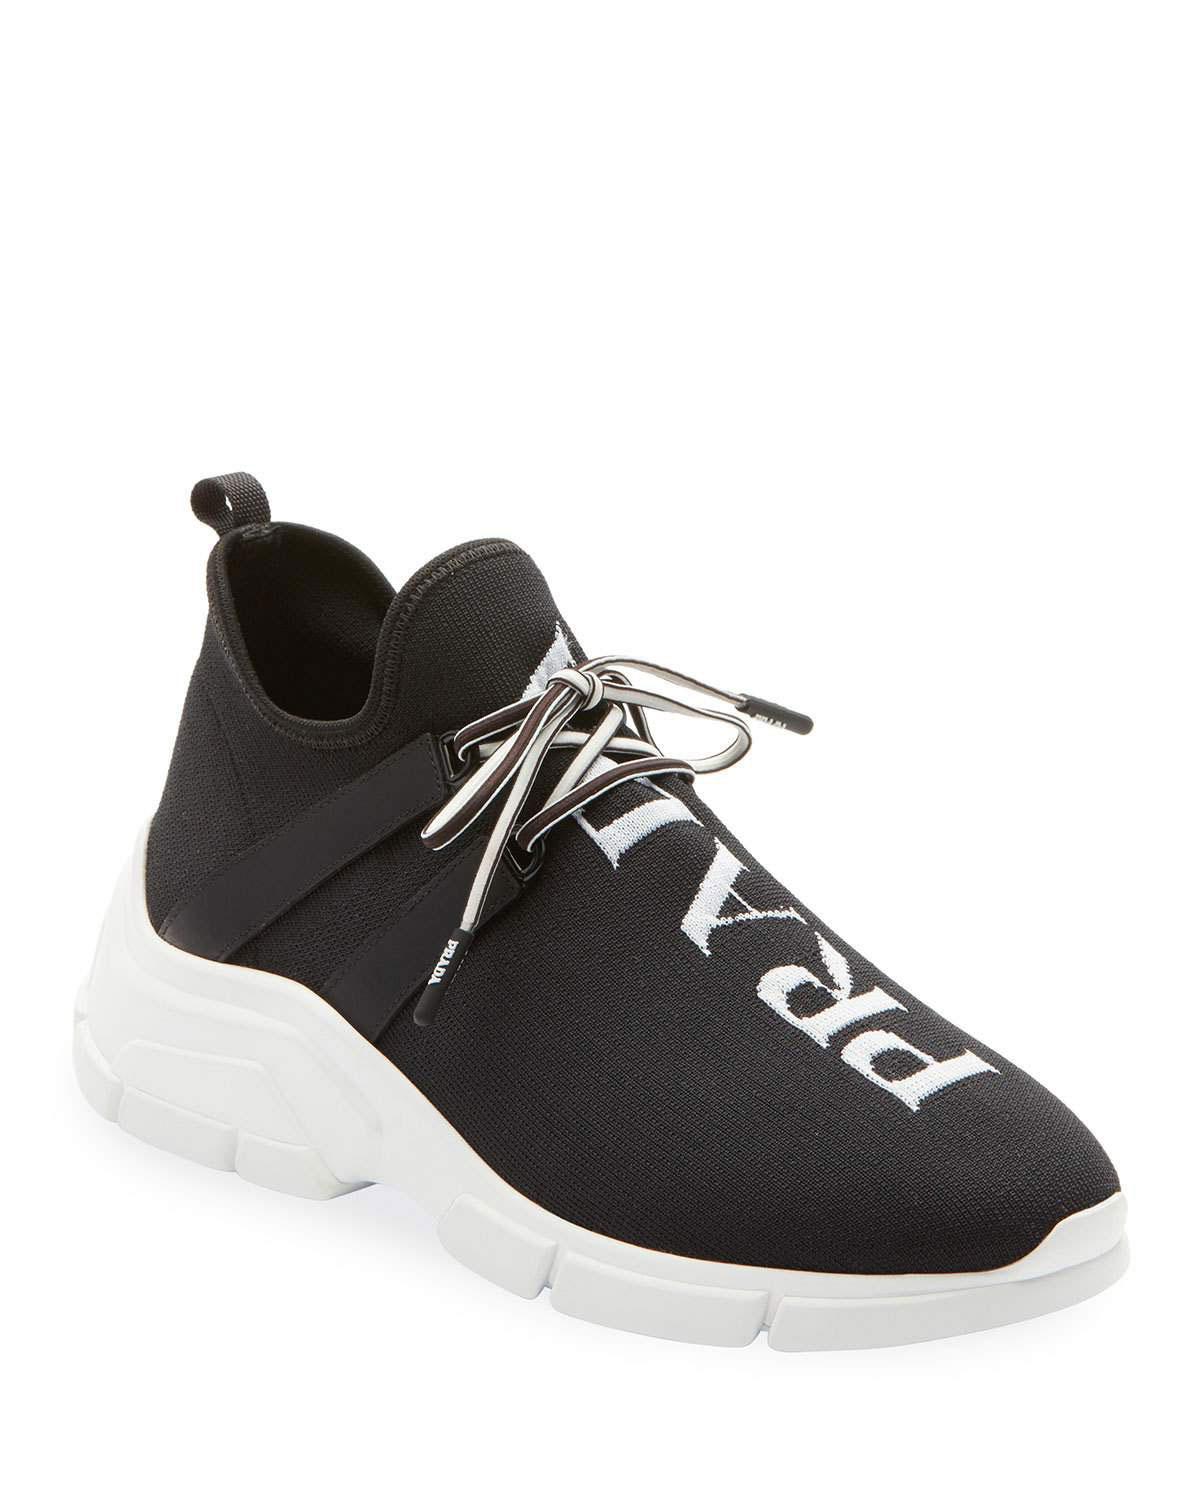 Prada Rubber Knit Logo Lace Up Sneakers In Black White Black Lyst